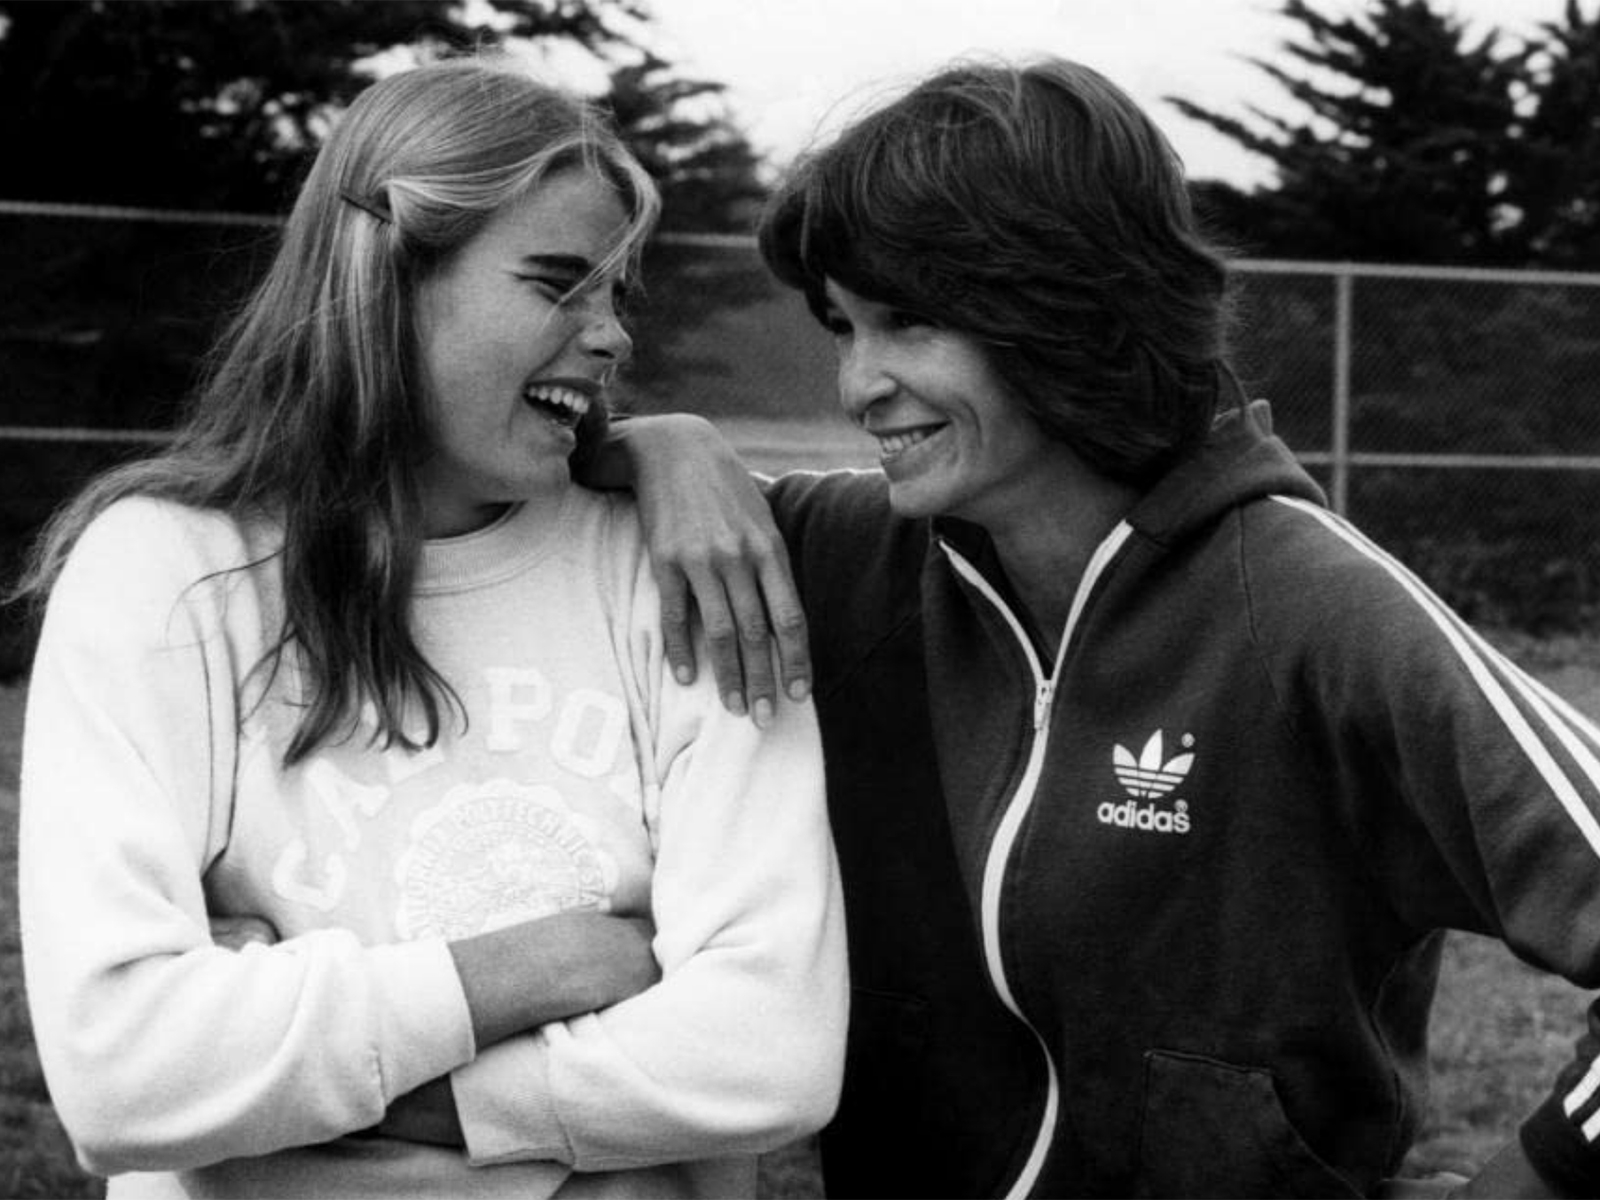 Mariel Hemingway and Patrice Donnelly in “Personal Best” (1982)